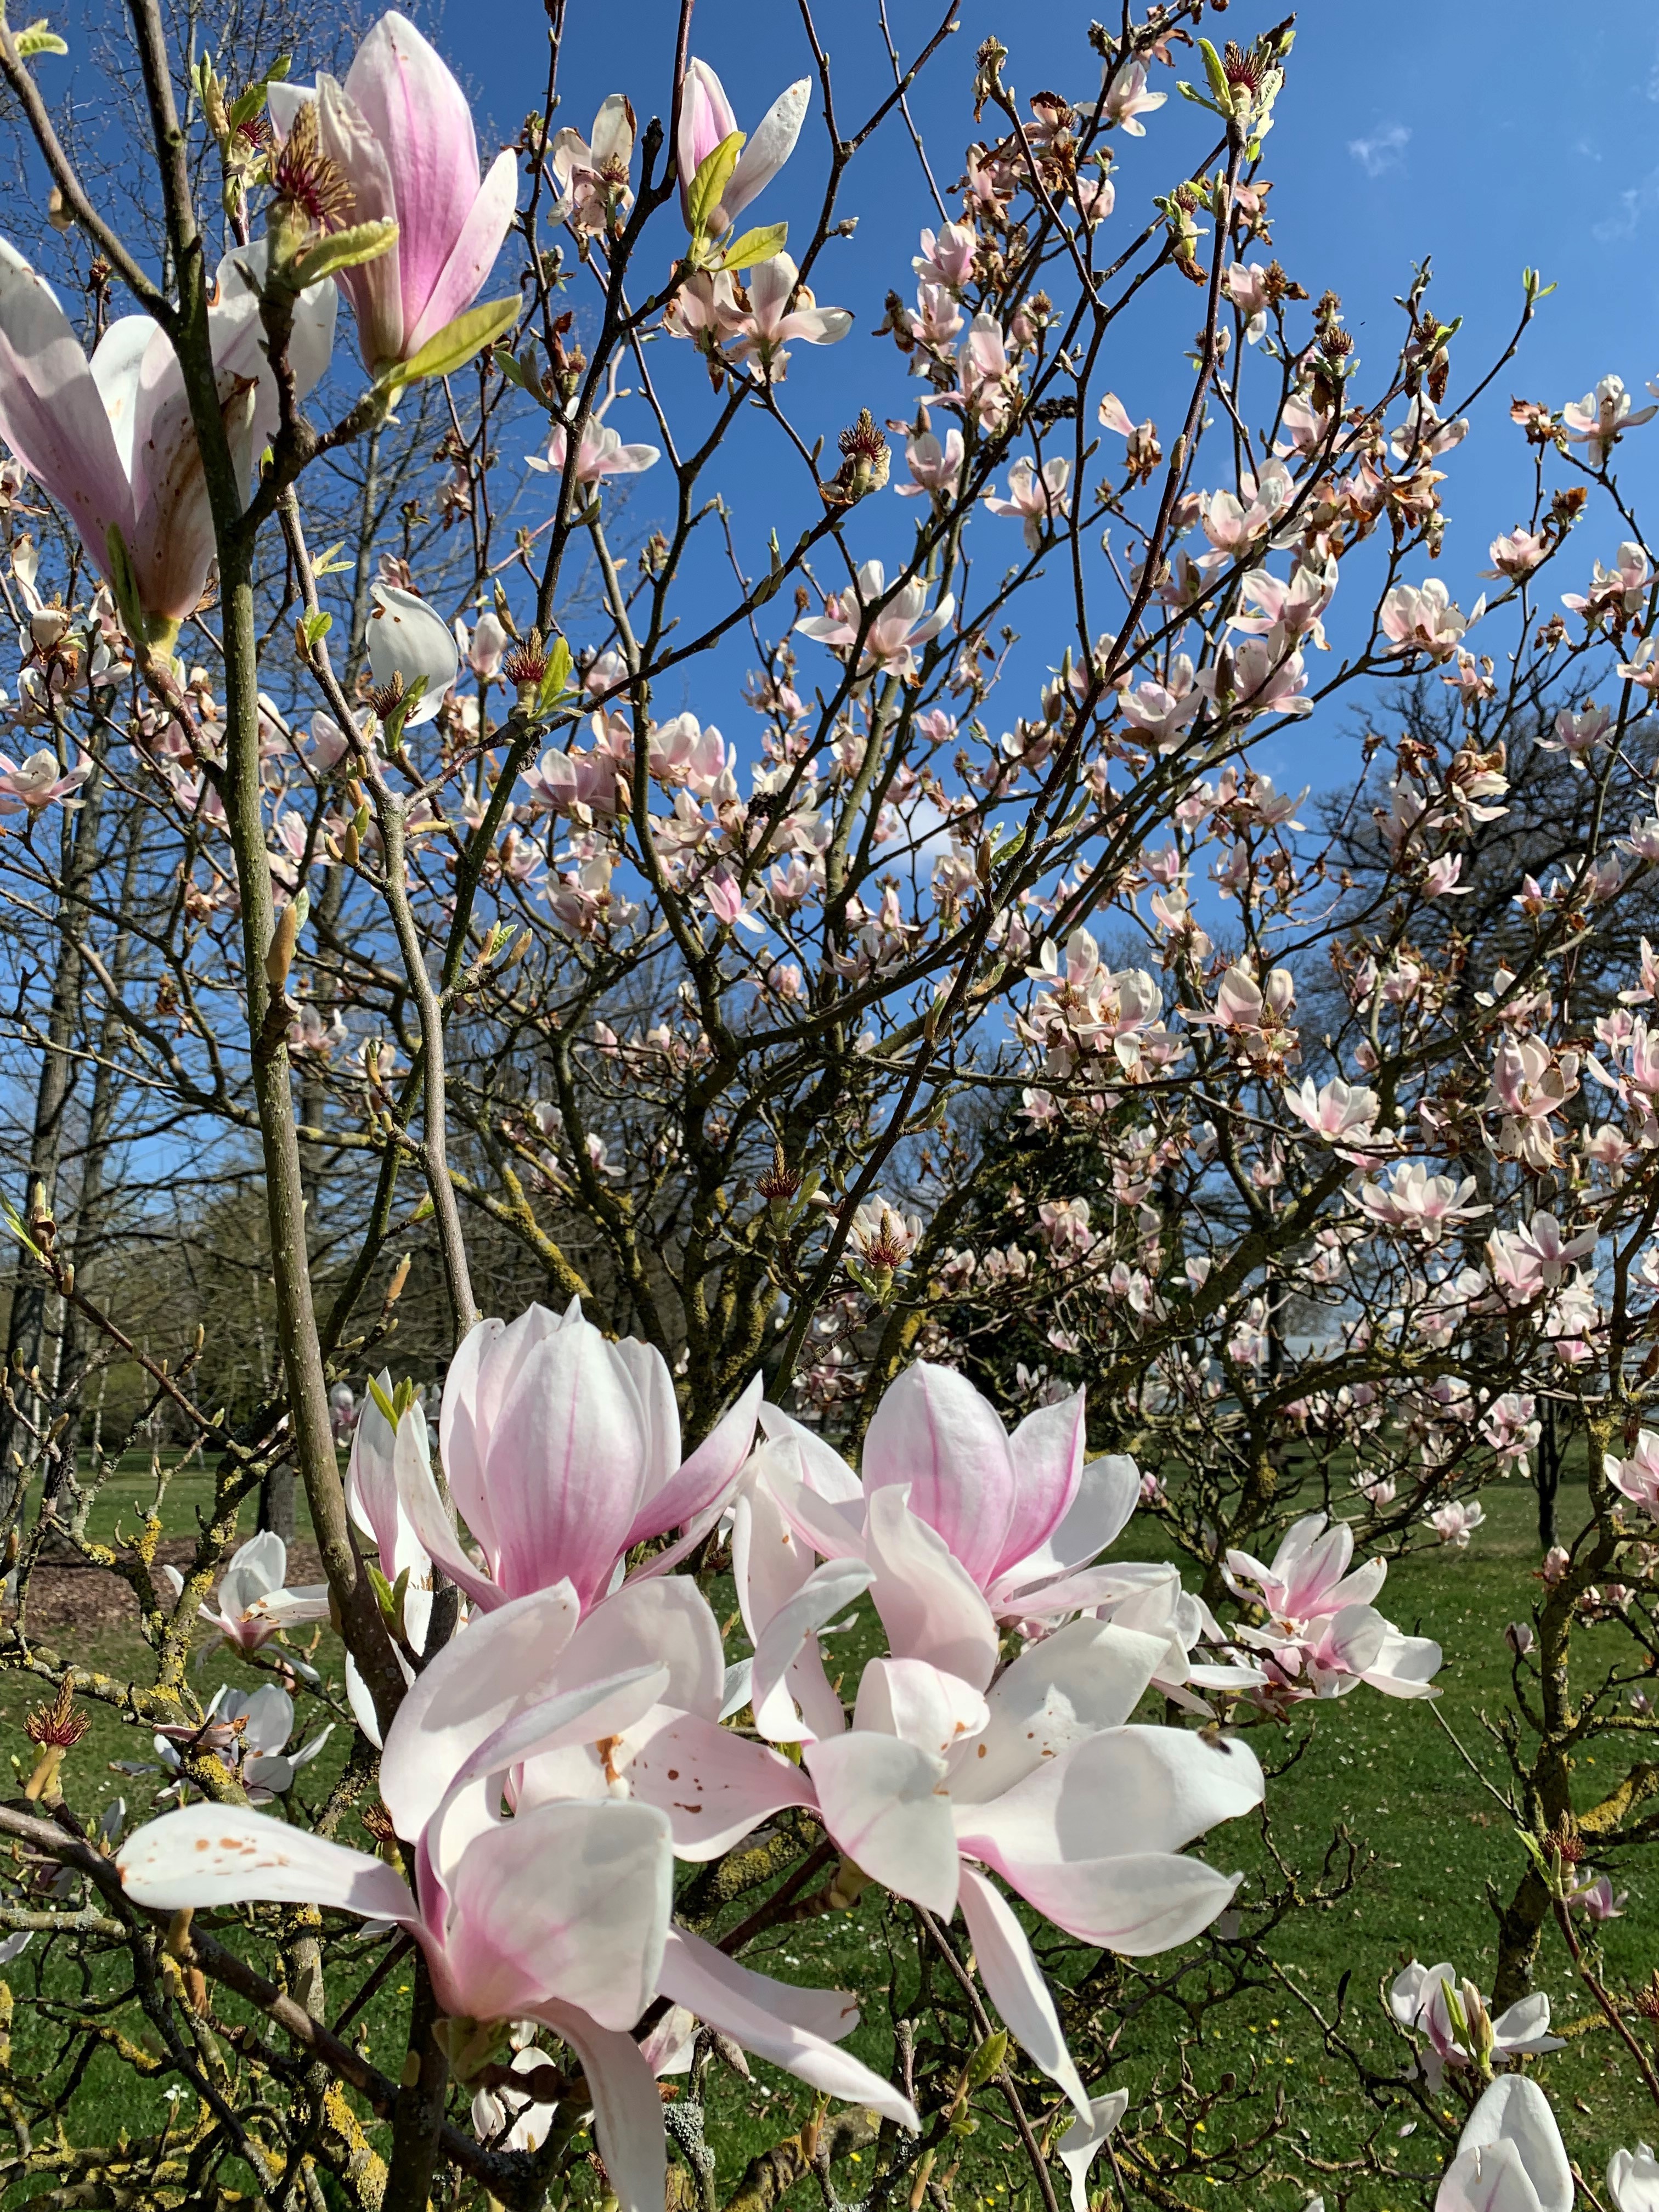 A small magnolia tree with white and pink flowers, most of which are only just starting to bloom, others in full bloom.